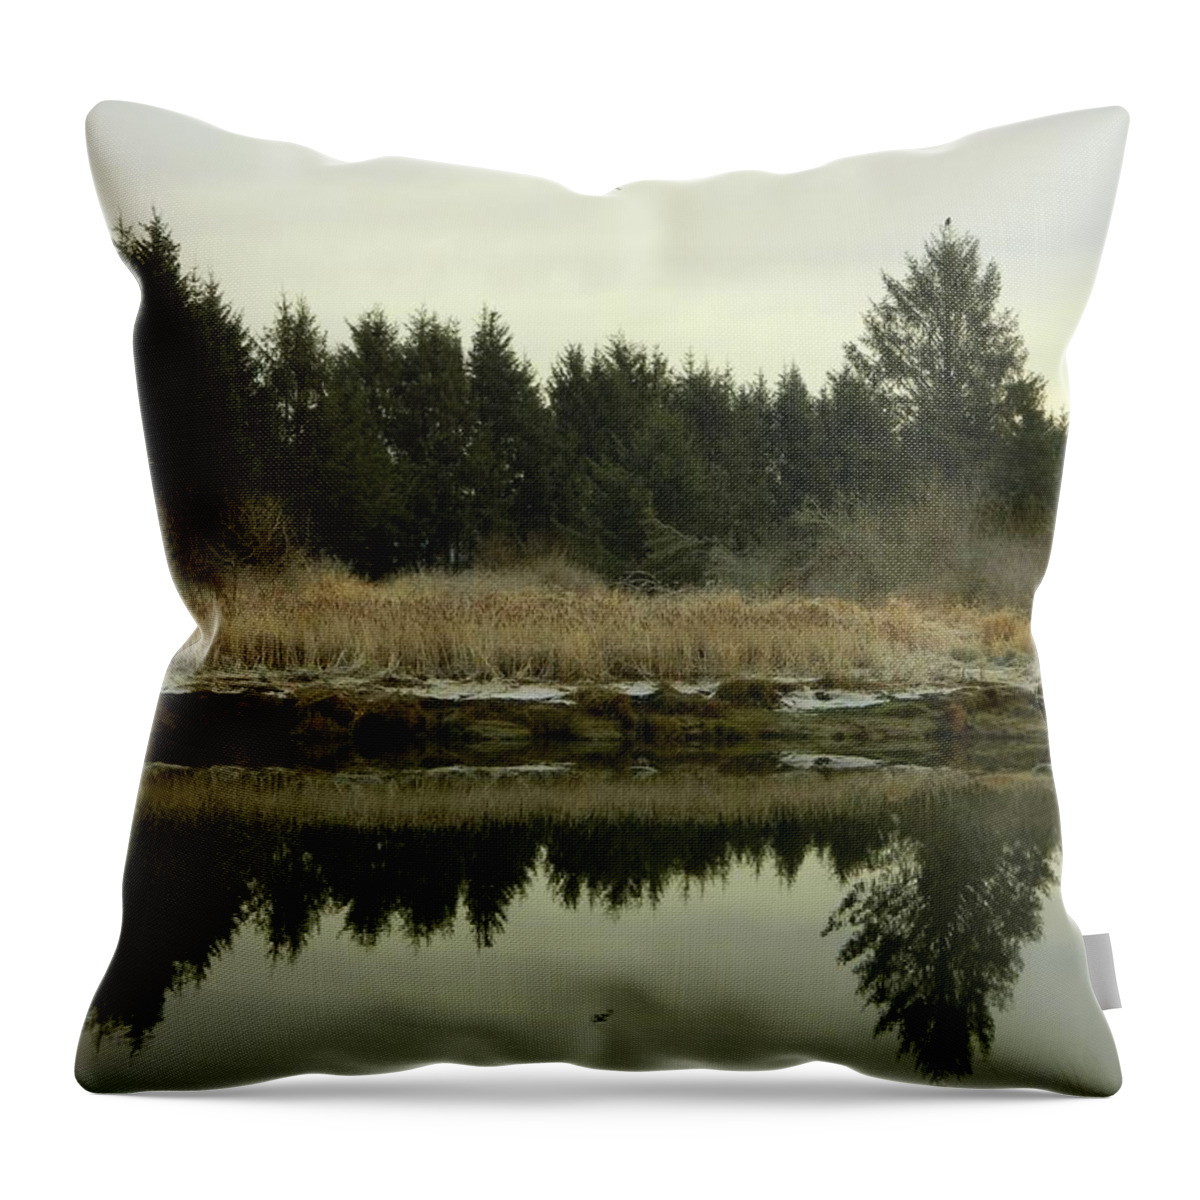 Winter Throw Pillow featuring the photograph Winter River 2 by Gallery Of Hope 